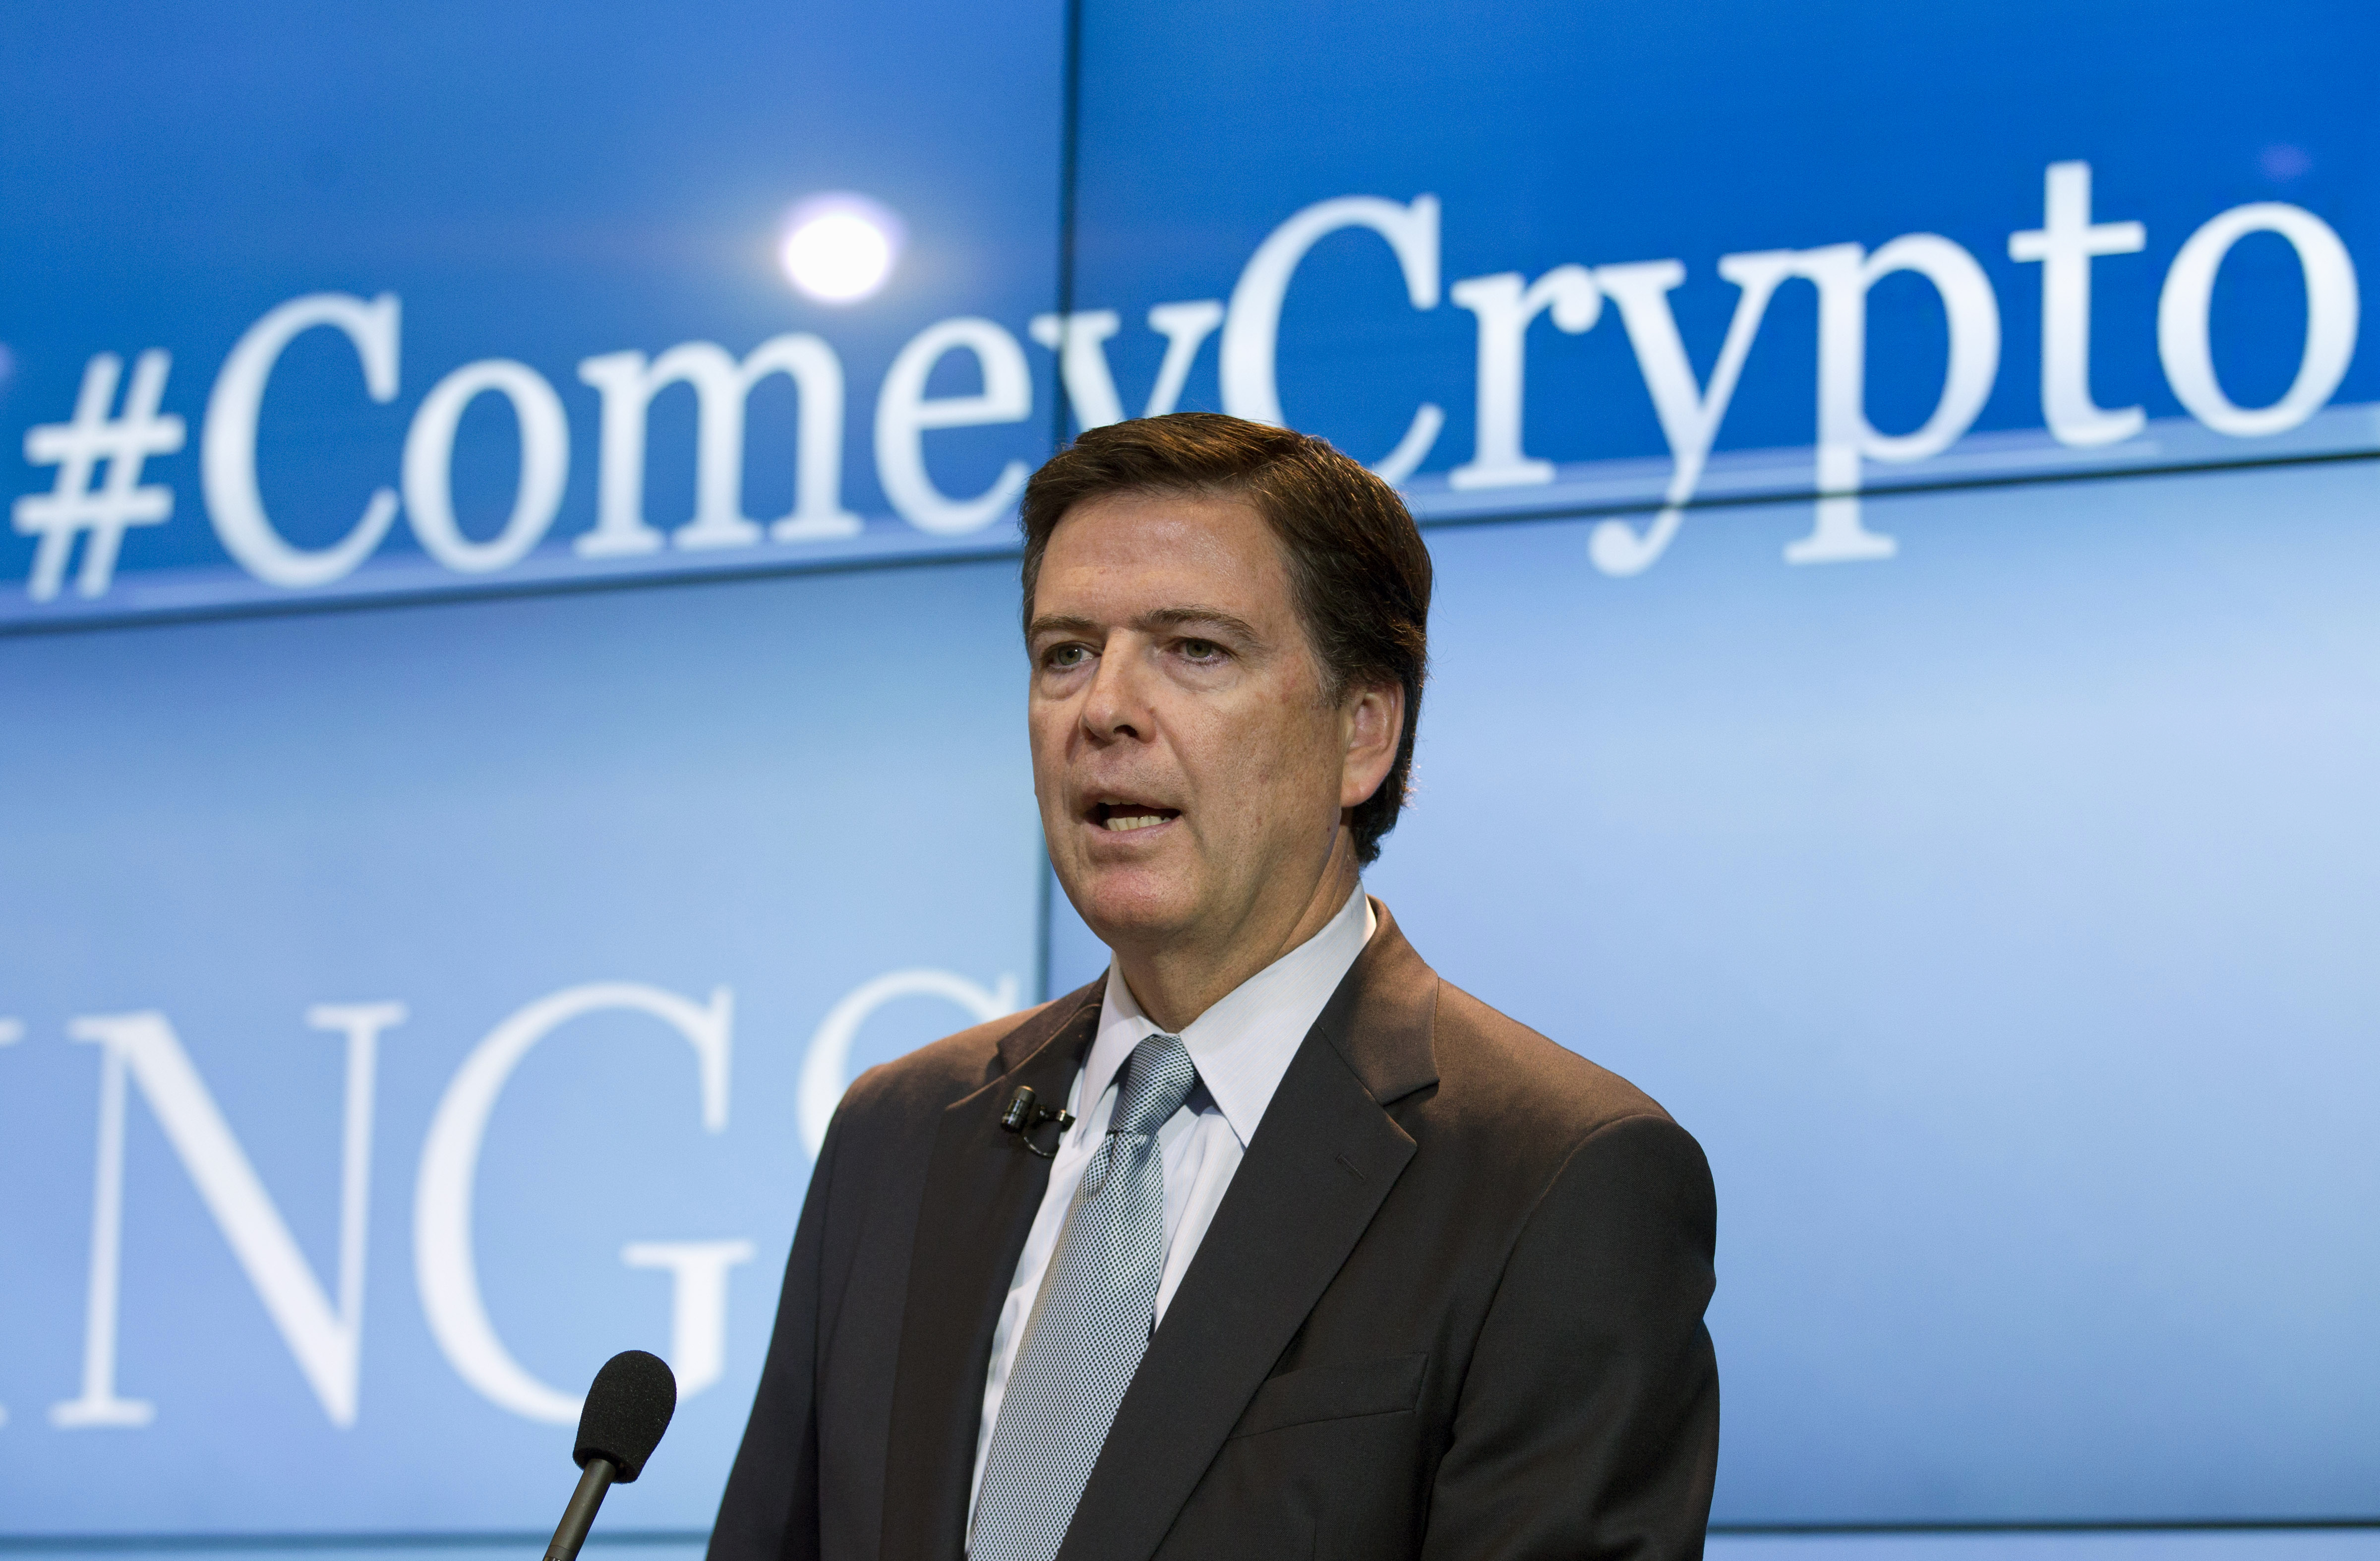 Fbi director thinks you’re too secure